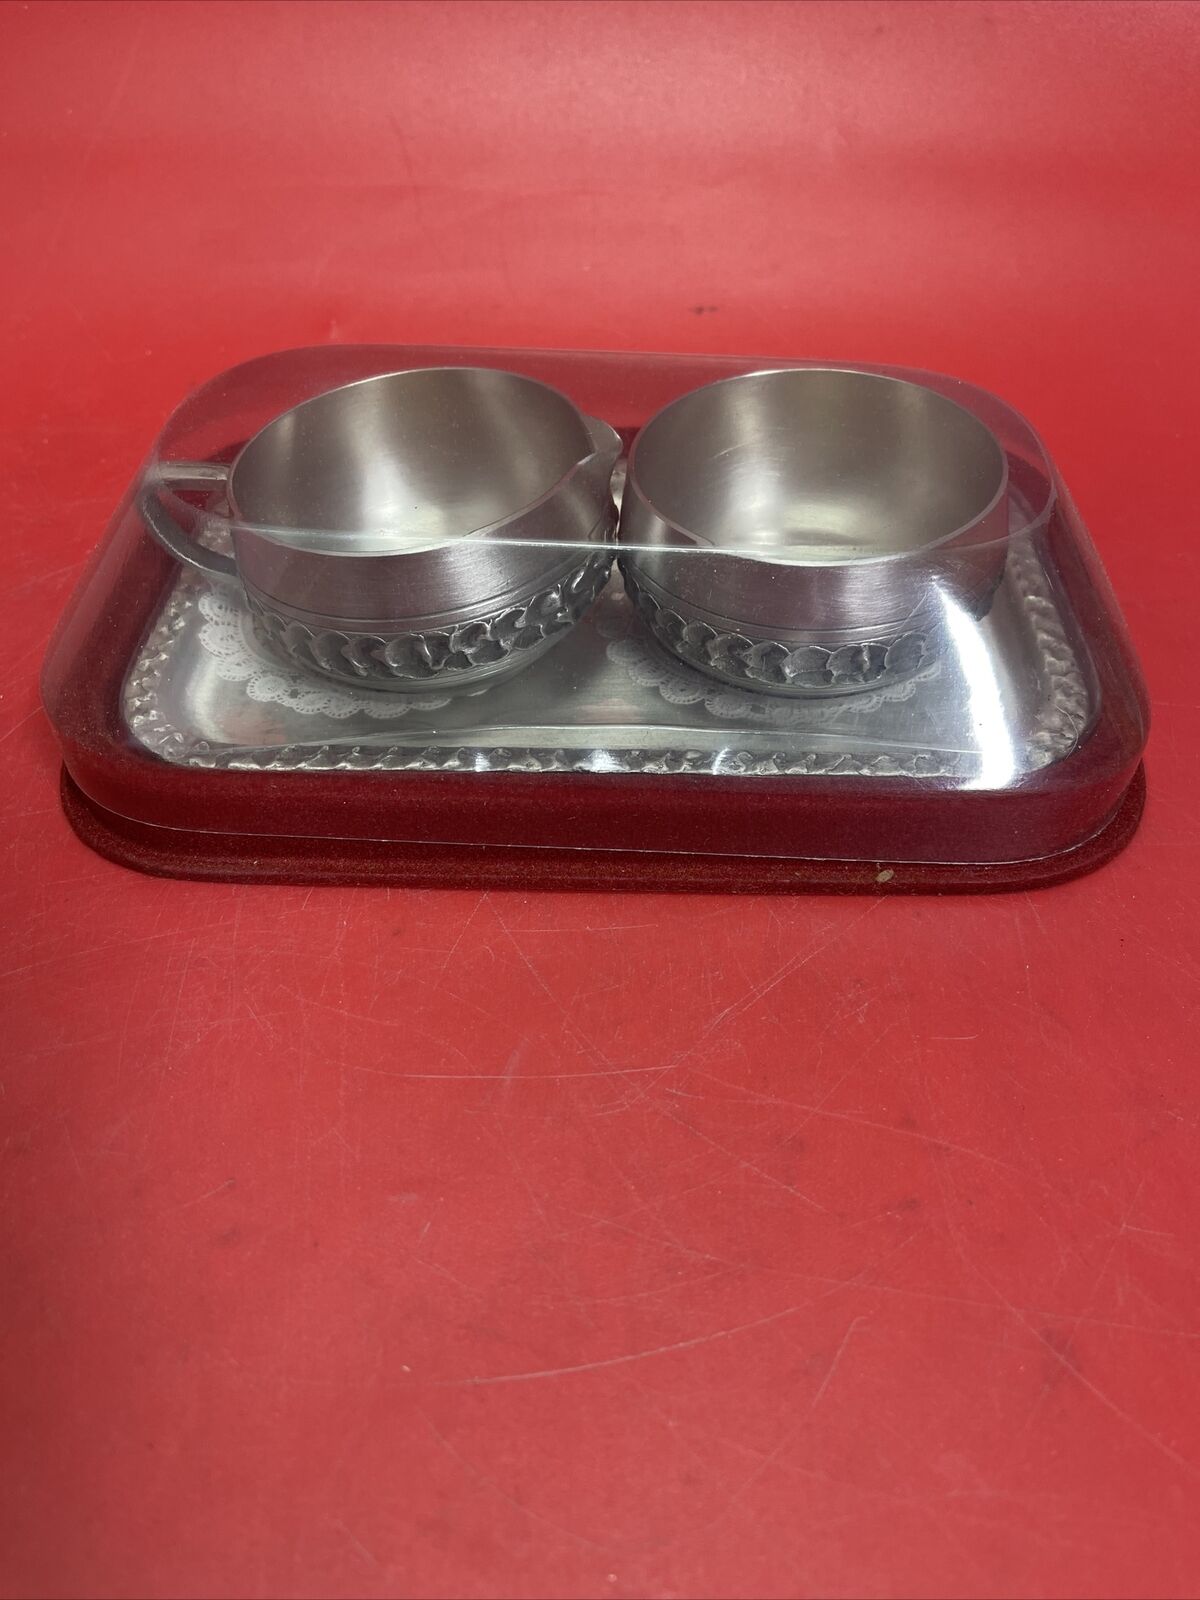 Oslo Pewter textured Cream and Sugar Set w/ Tray.  Perletinn design from Norway.